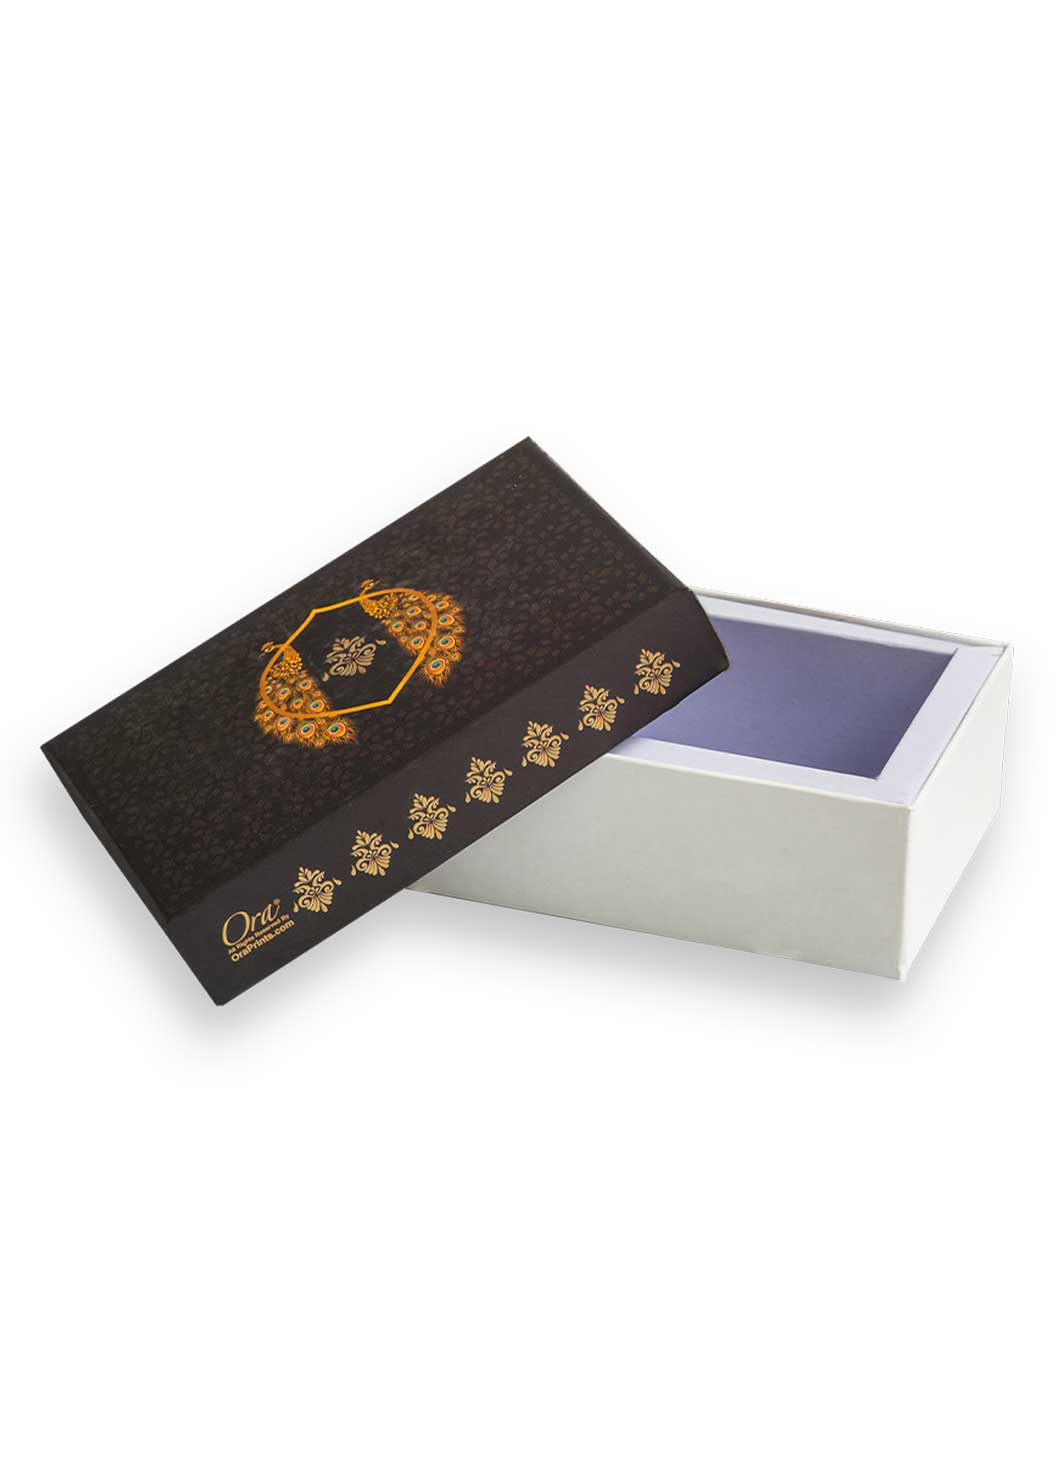 Beautiful Peacock Blue & Gold Design Box for Packing